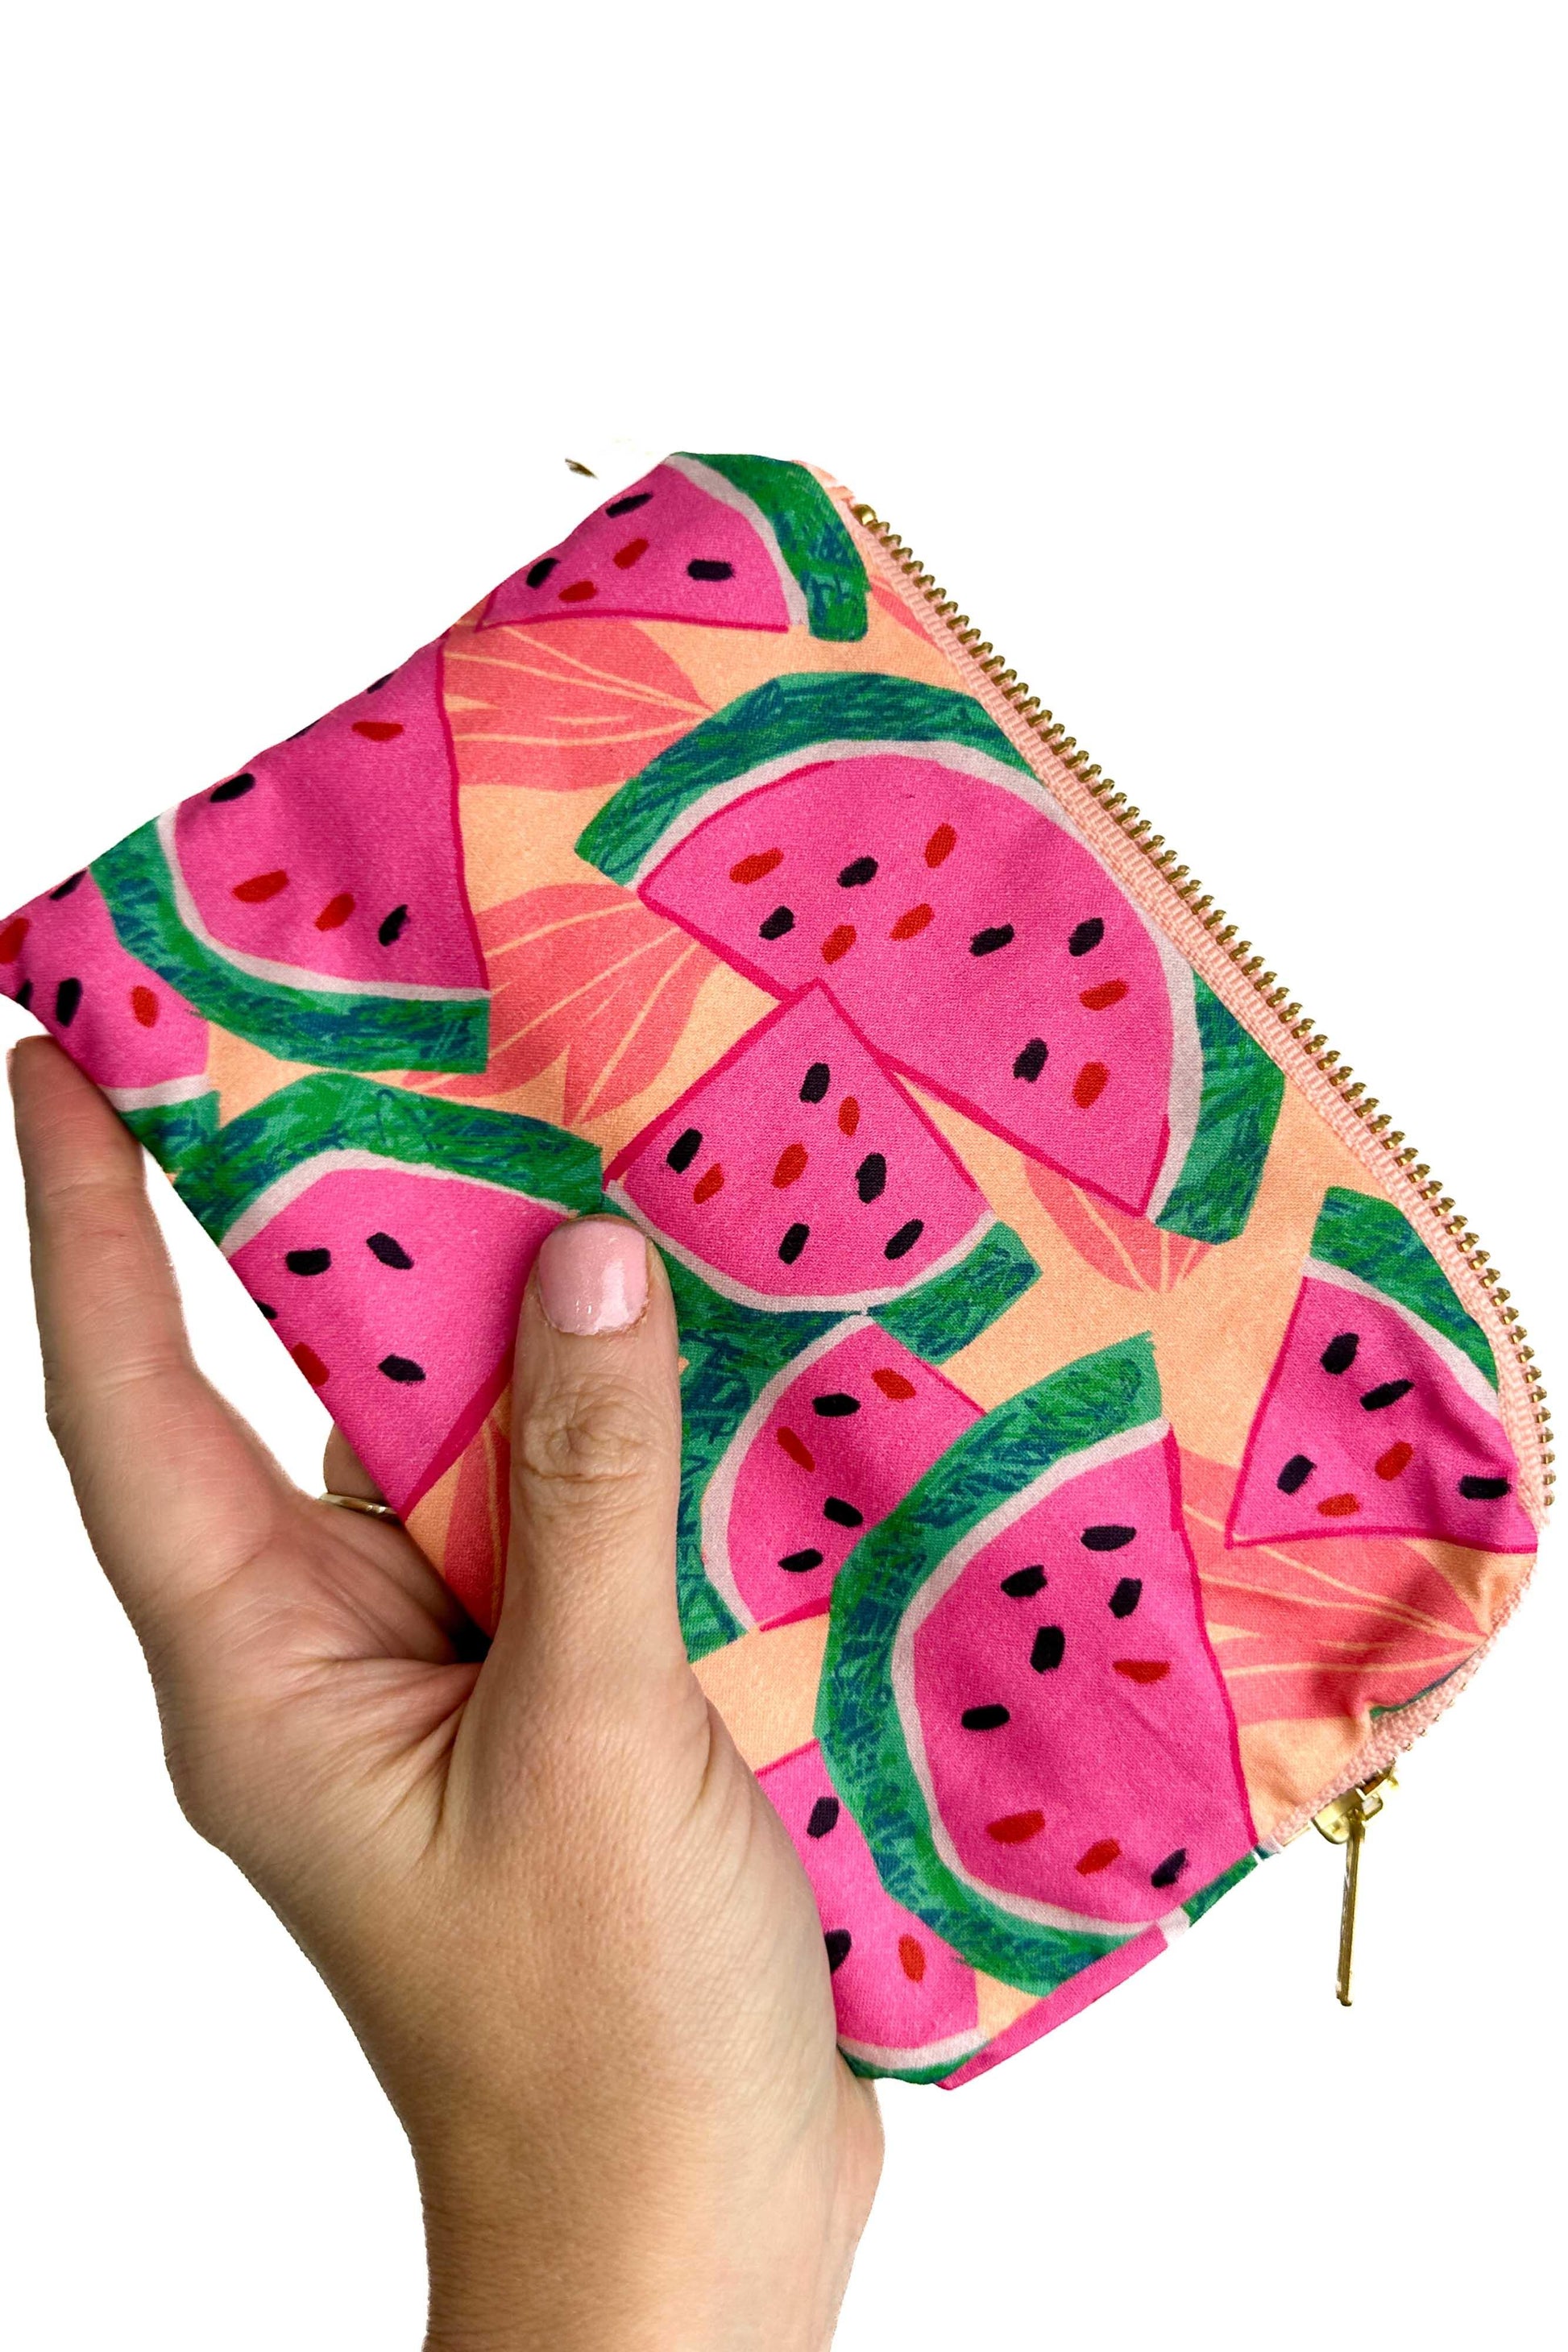 Watermelon Everyday Travel Bag with Compartments READY TO SHIP - Modern Makerie